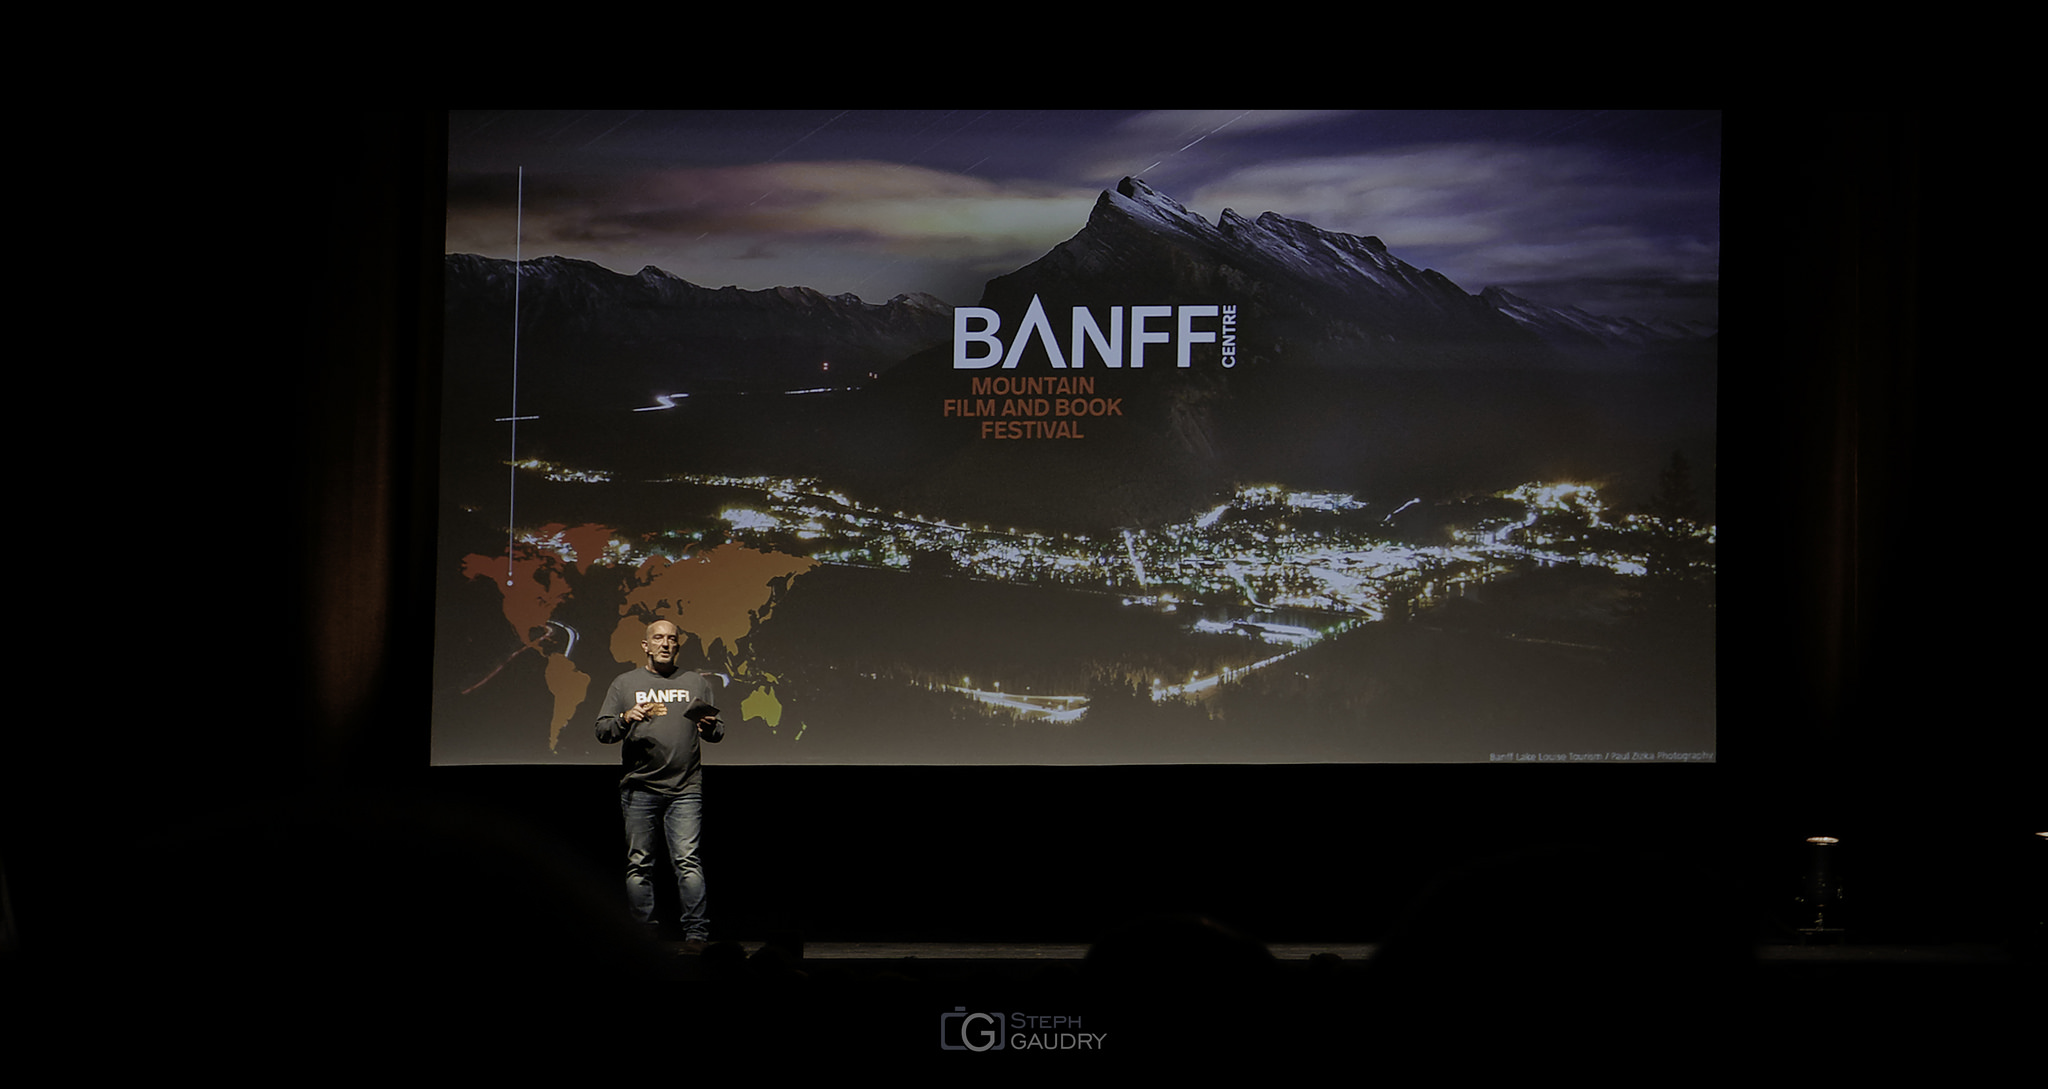 BANFF Mountain film and book festival [Click to start slideshow]